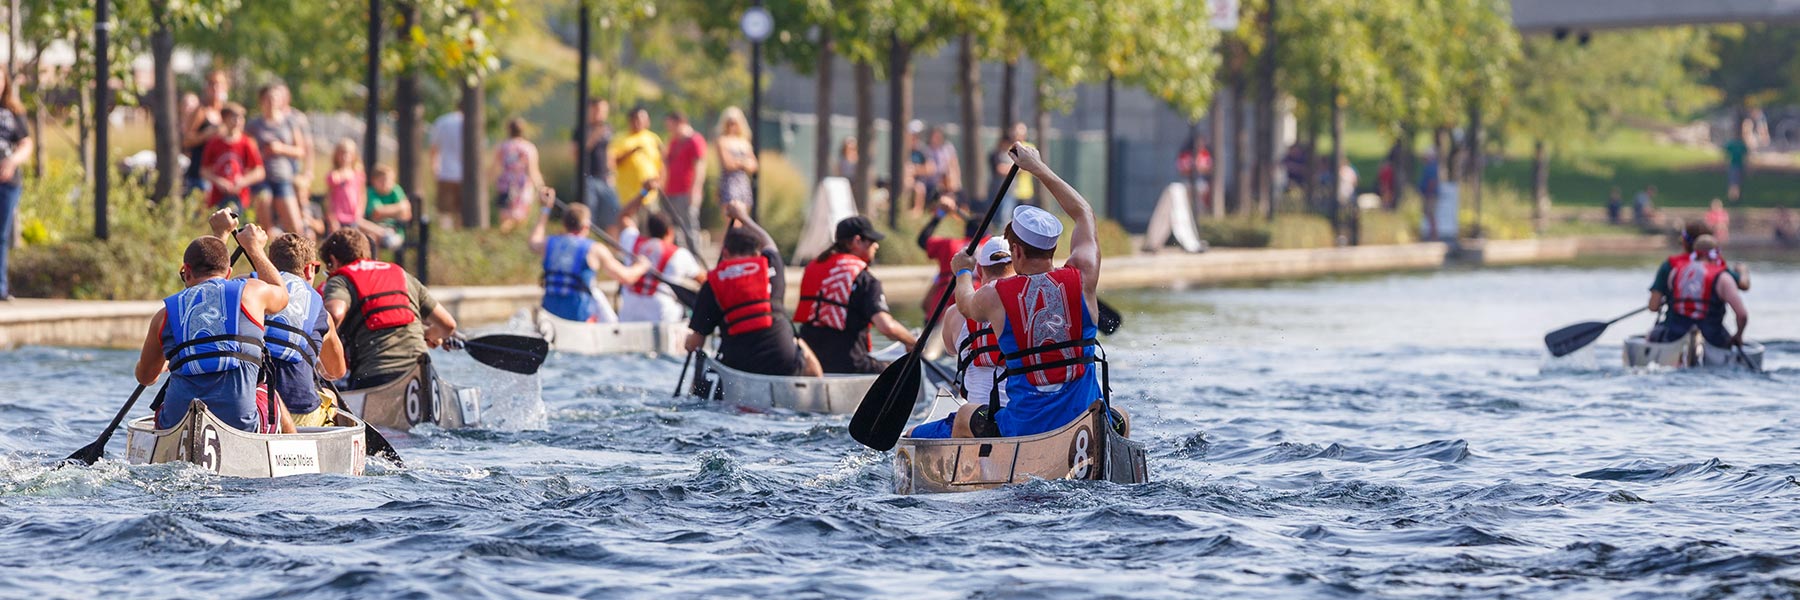 People compete in boats at the regatta.